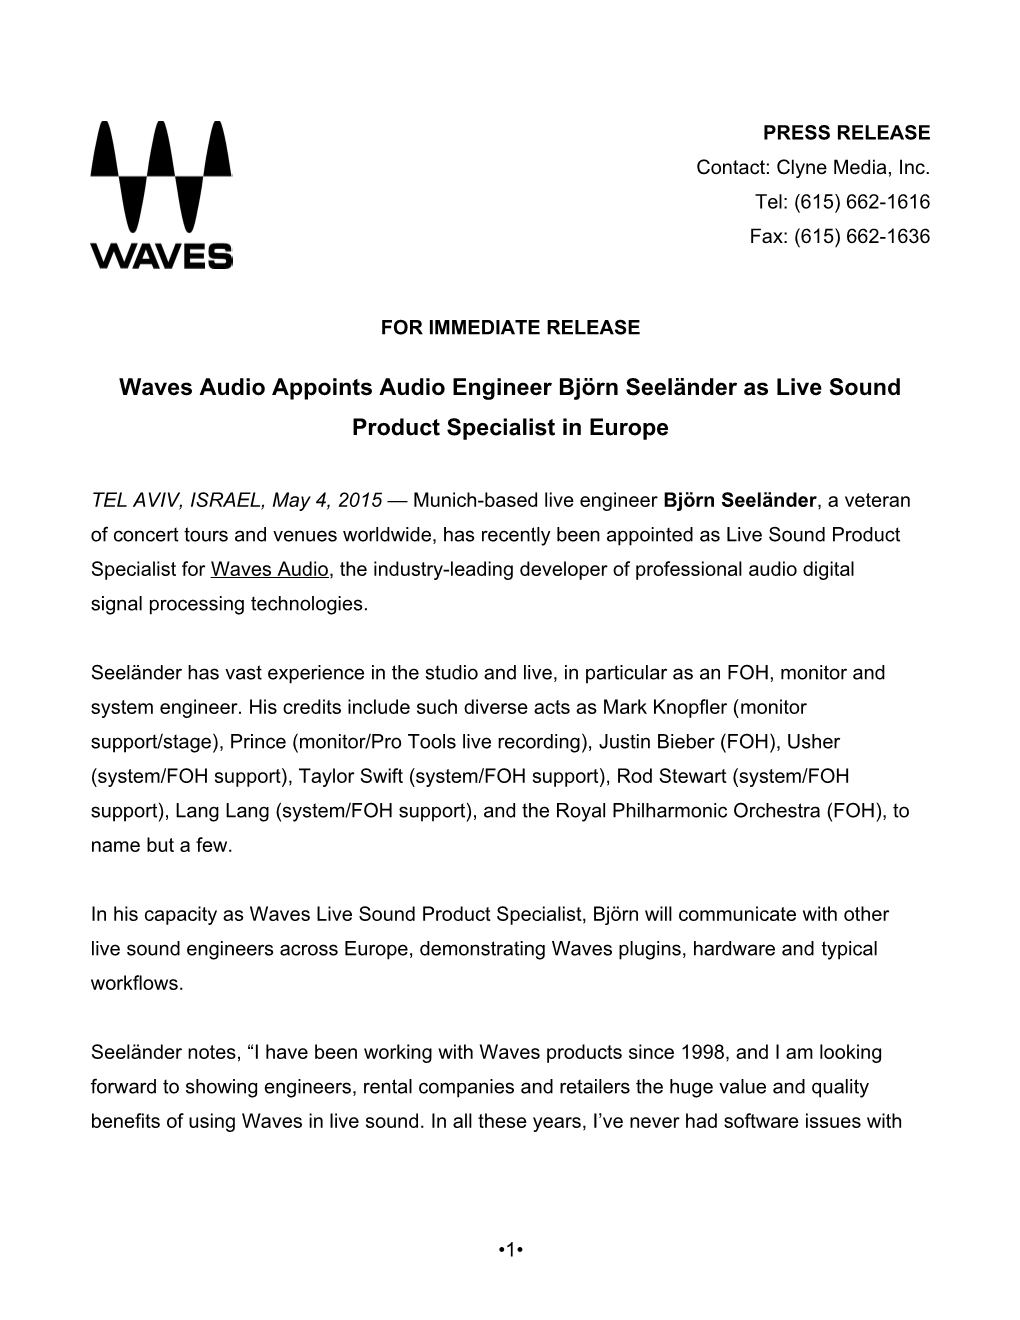 Waves Audio Appoints Audio Engineerbjörn Seeländer As Live Sound Product Specialist in Europe